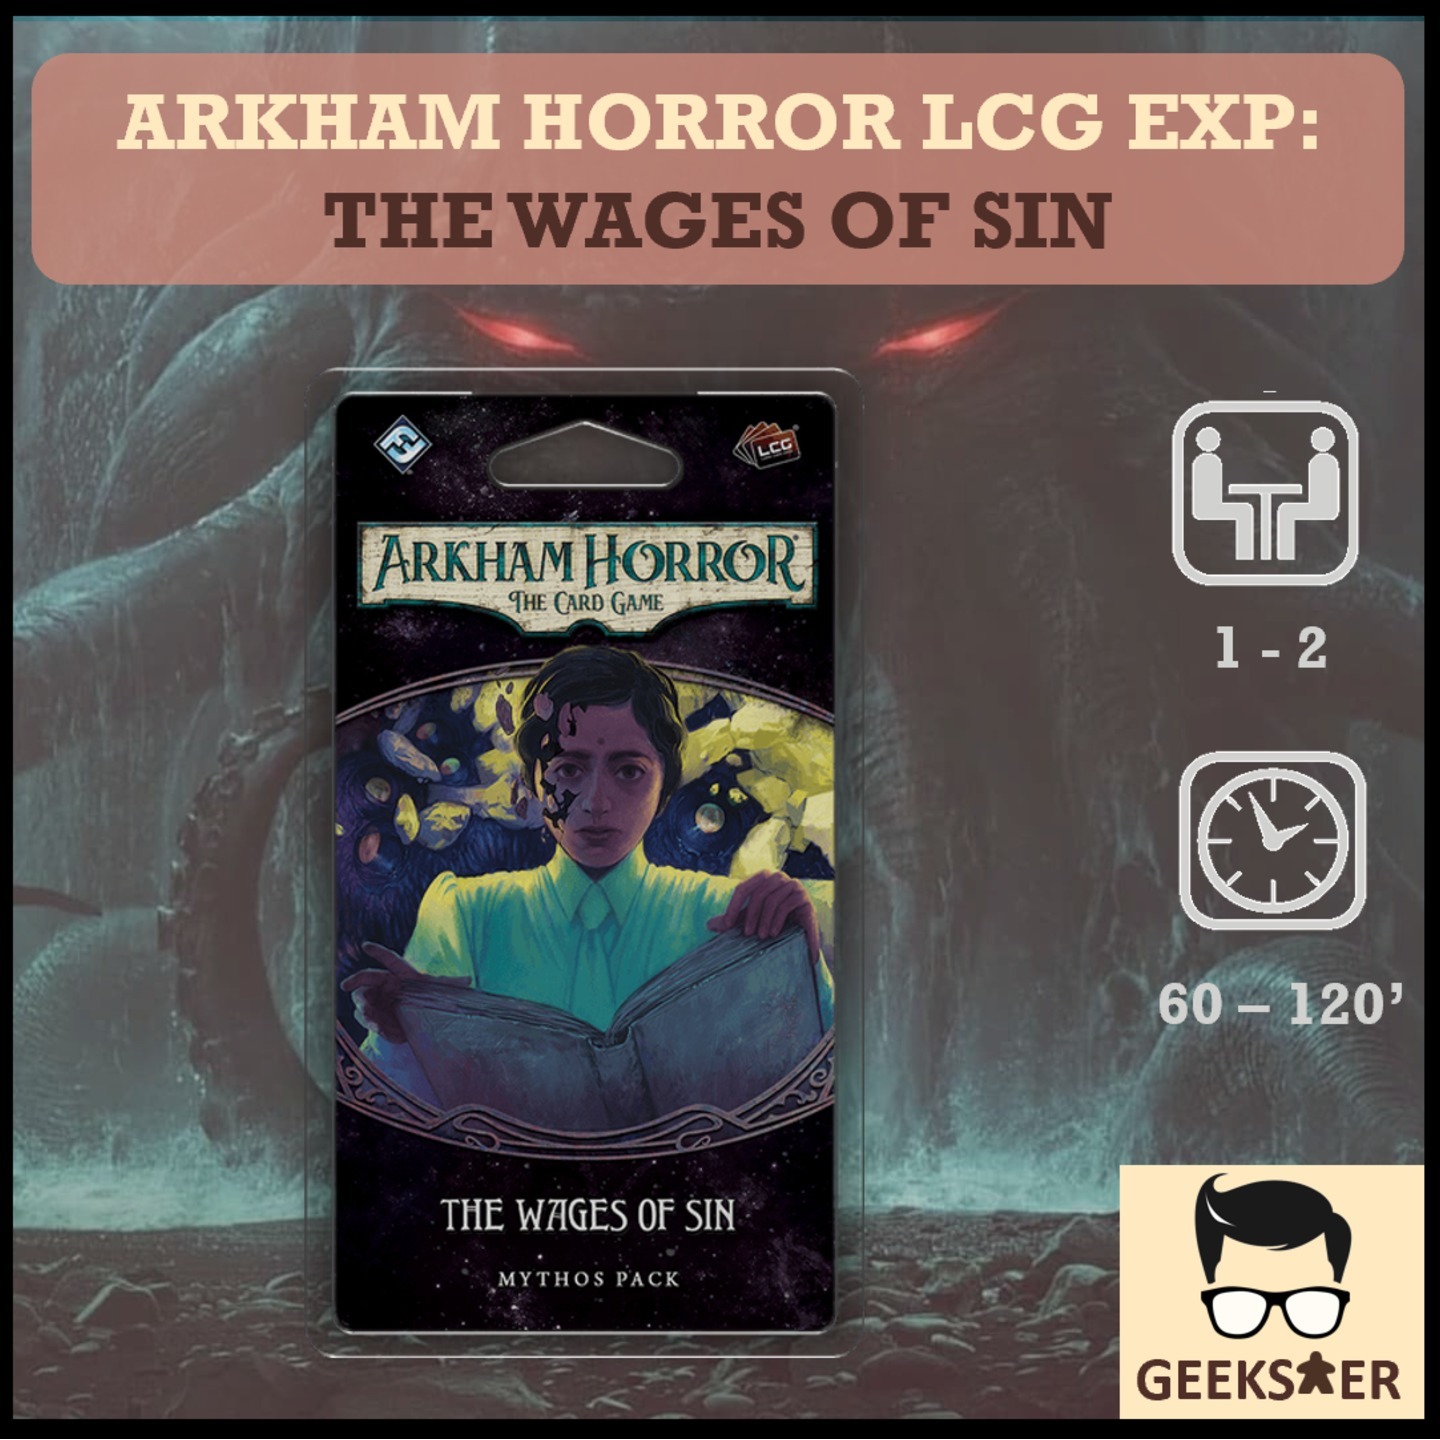  Arkham Horror LCG Exp - The Wages of Sin